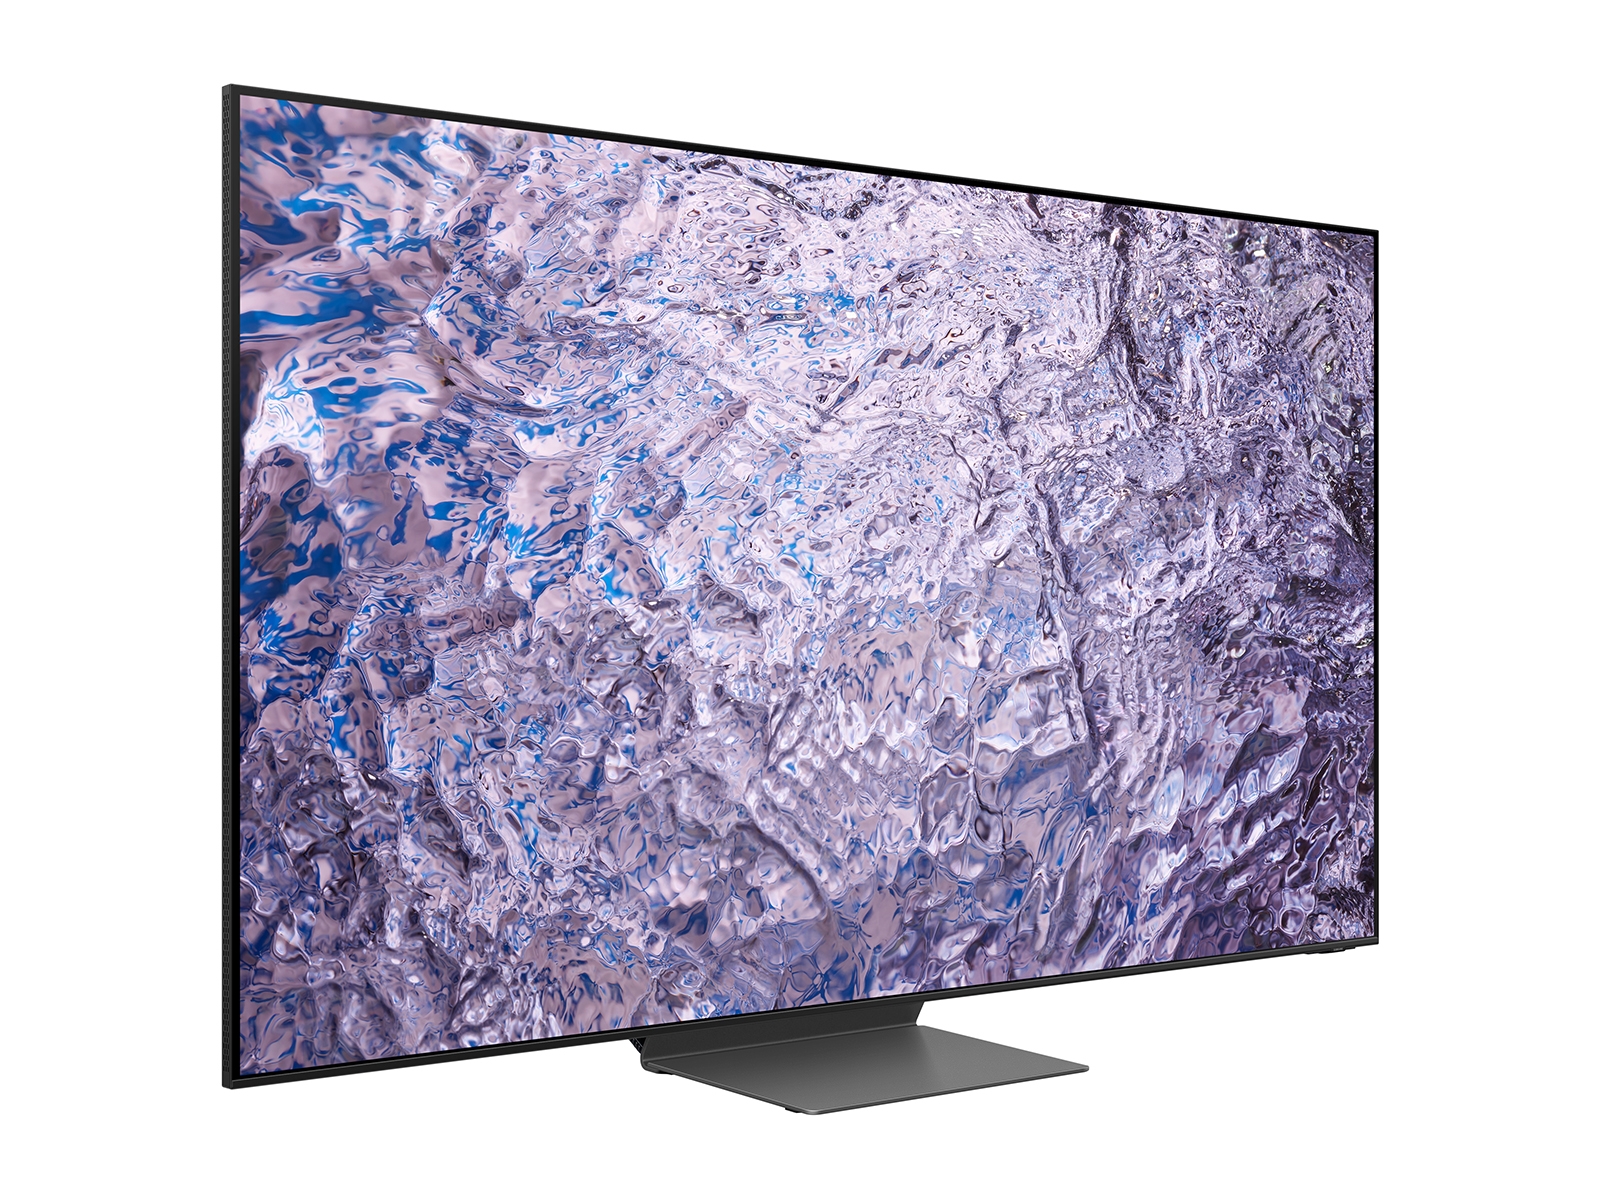 8K TV: Prices and new models from Samsung, LG, Sony and more